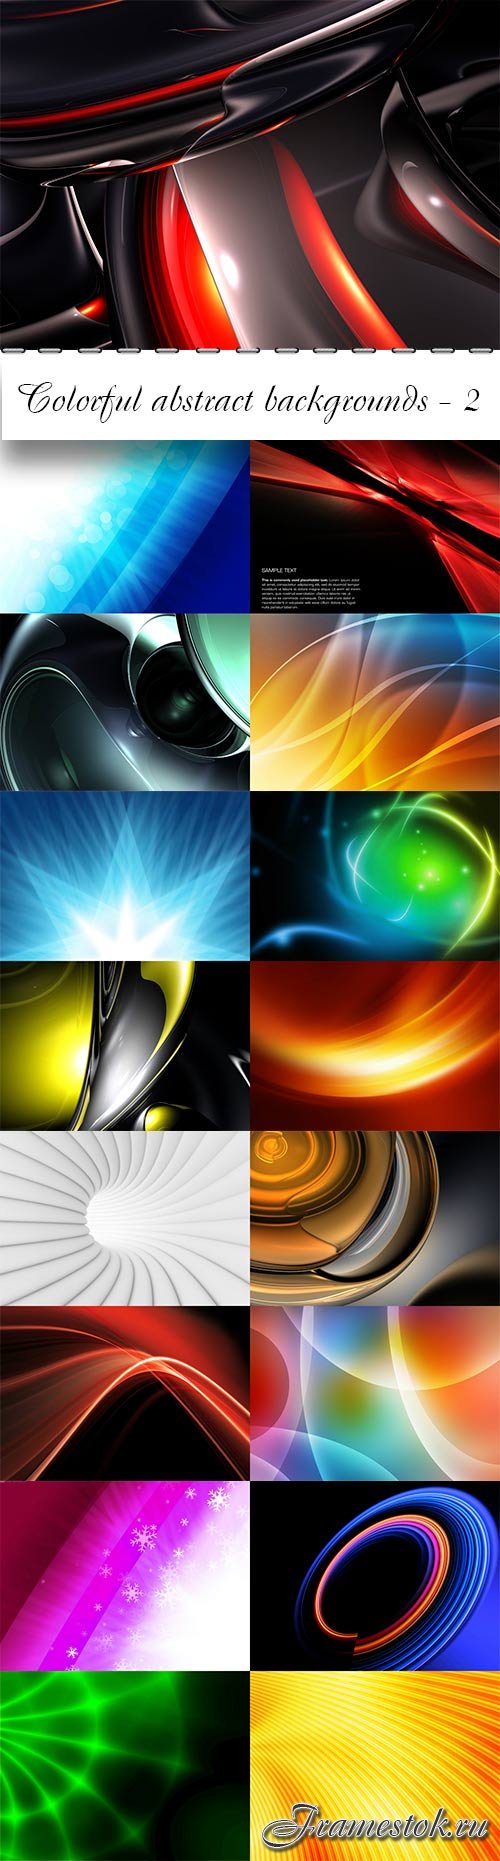 Colorful abstract backgrounds - 2